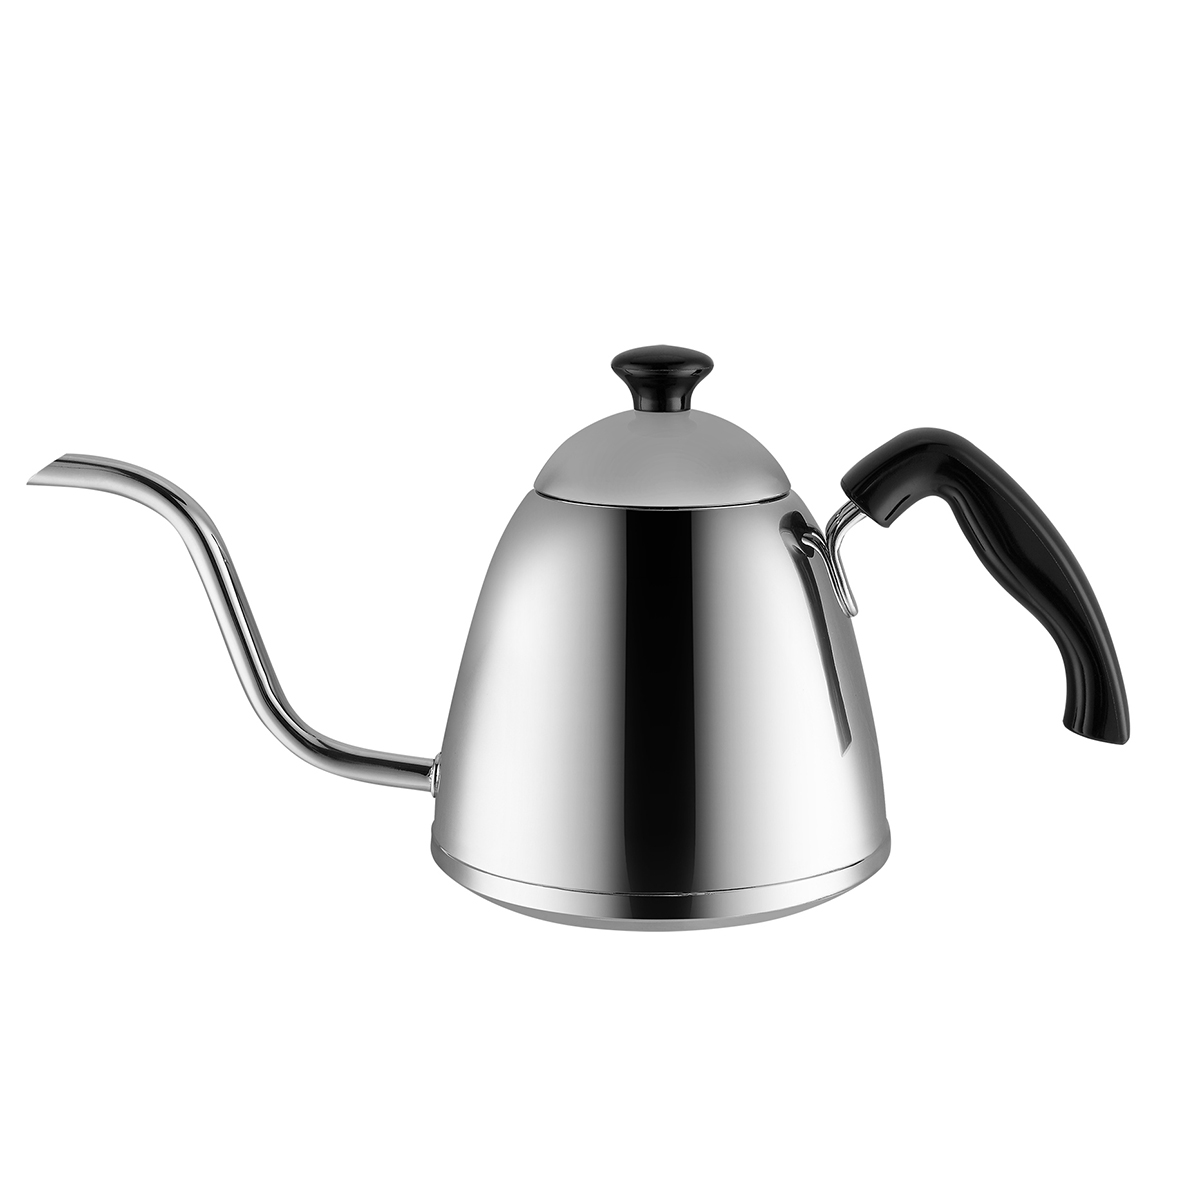 900ml Pour Over Stainless Steel Coffee Kettle with Bakelite Handle